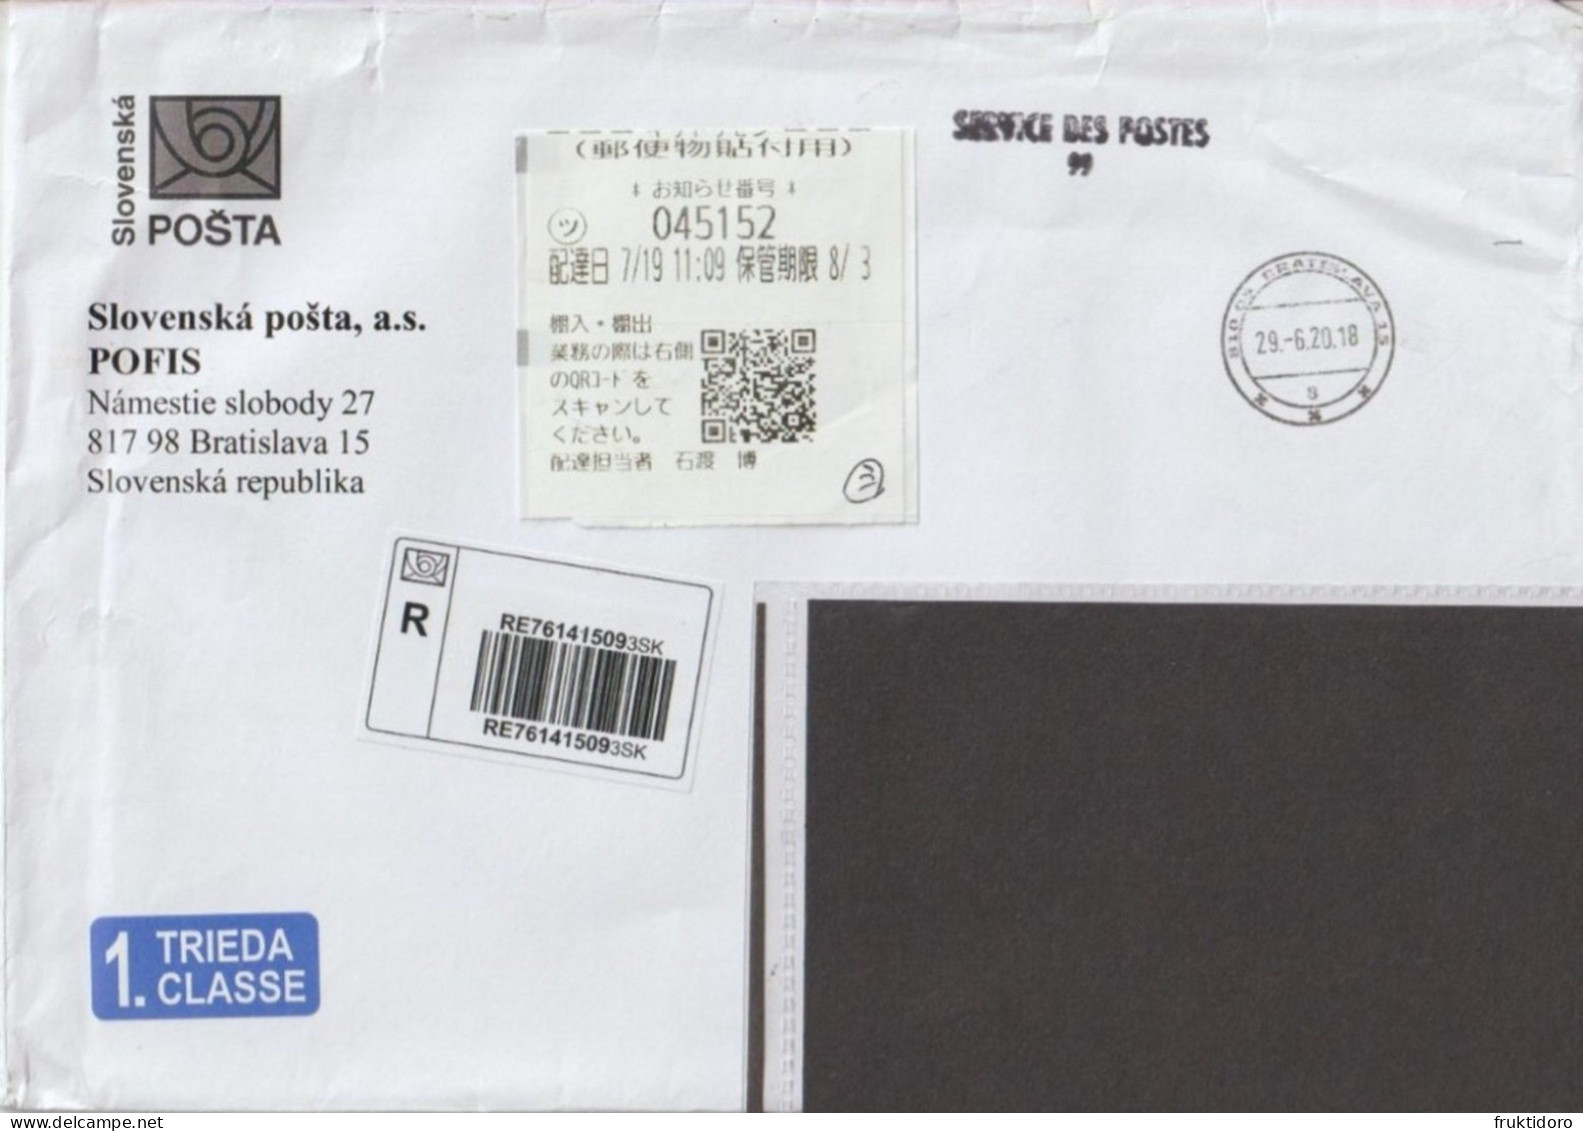 Slovakia Registered Letters from Bratislava to Japan - Barcode - QR Code - Circulated - 2015/2016/2018/2019/2020